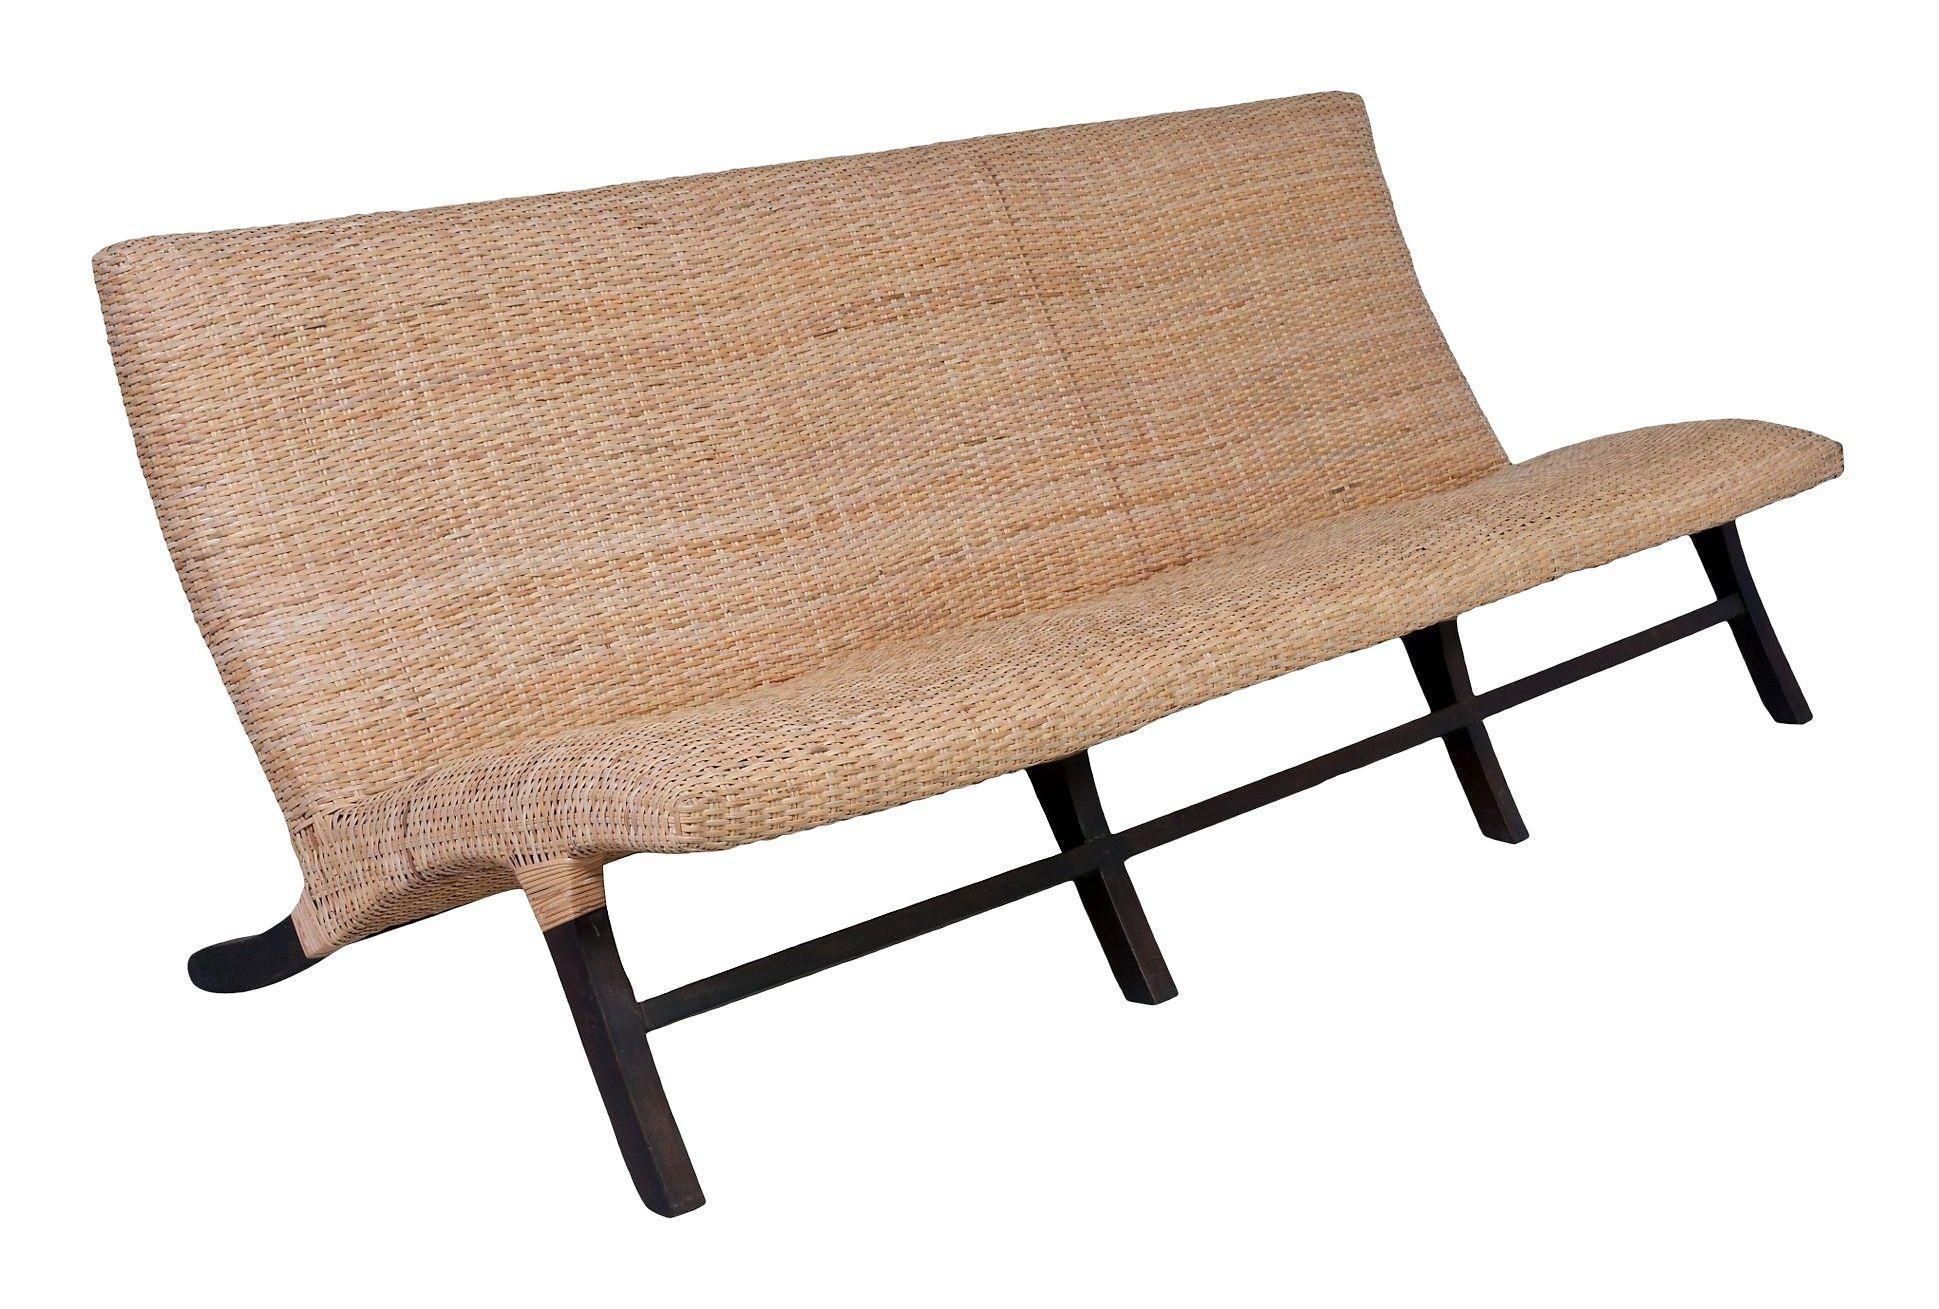 Balinese Rattan Light Tan Armless Sofa On Chairish Pertaining To Black And Tan Rattan Console Tables (View 19 of 20)